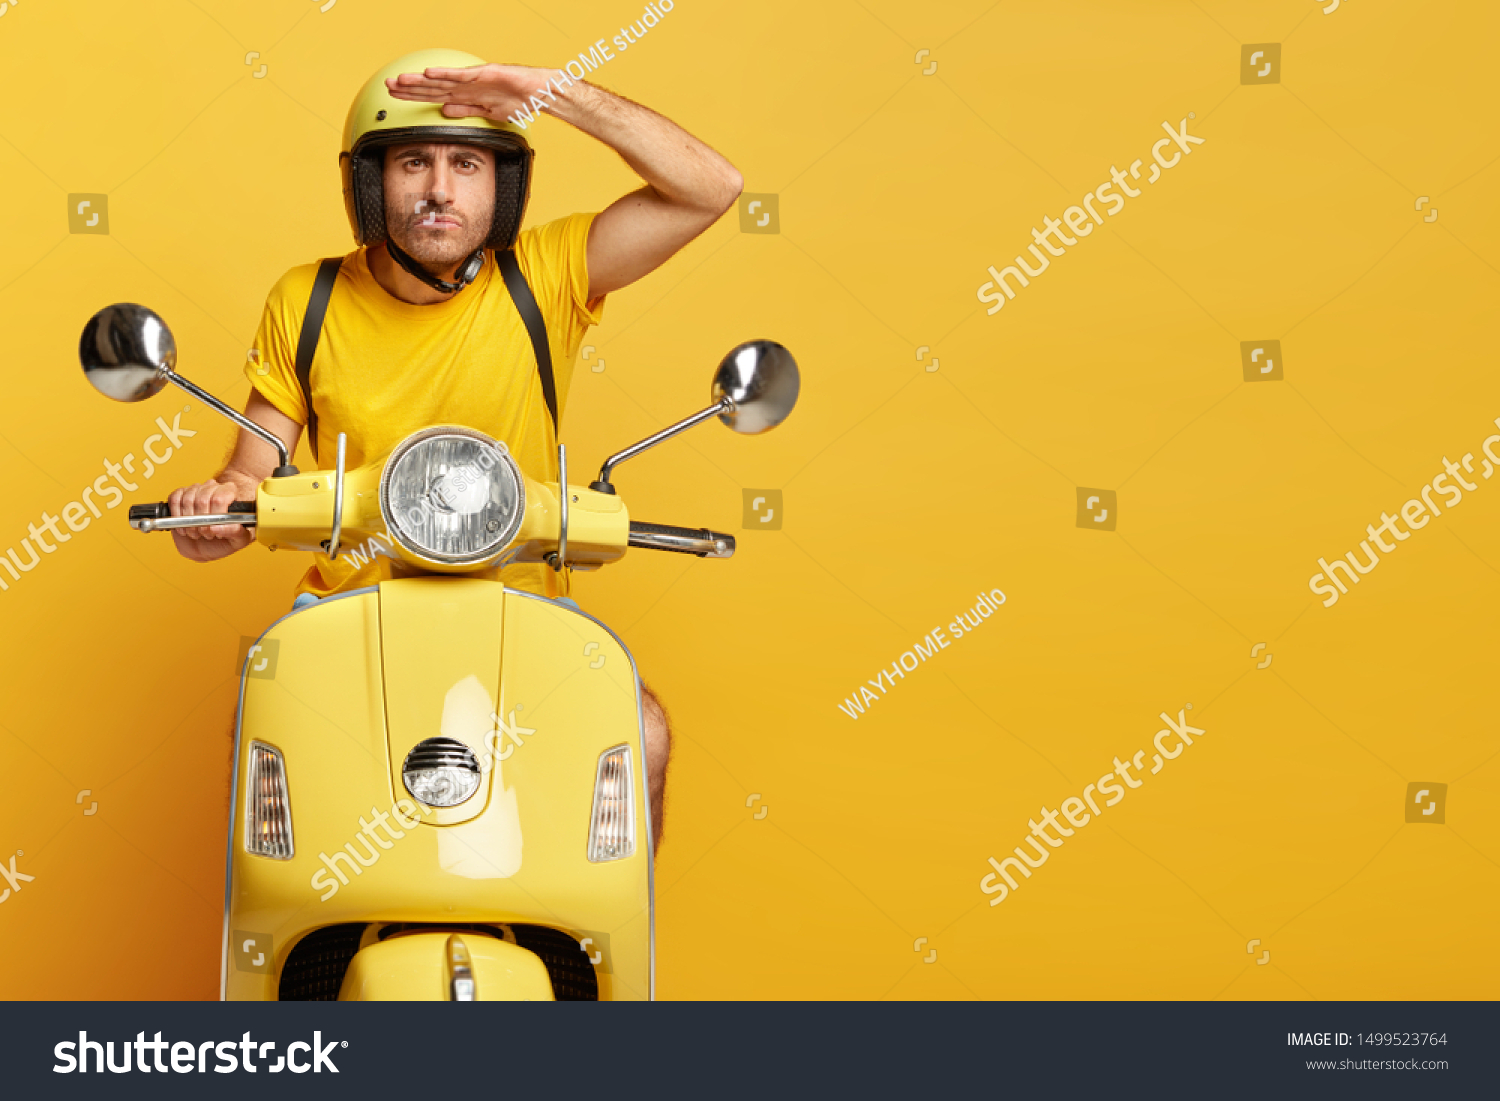 Concentrated male driver in helmet on scooter, keeps palm near forehead, poses on motorbike, carries rucksack, has serious face expression, poses against yellow background, copy space on right side #1499523764